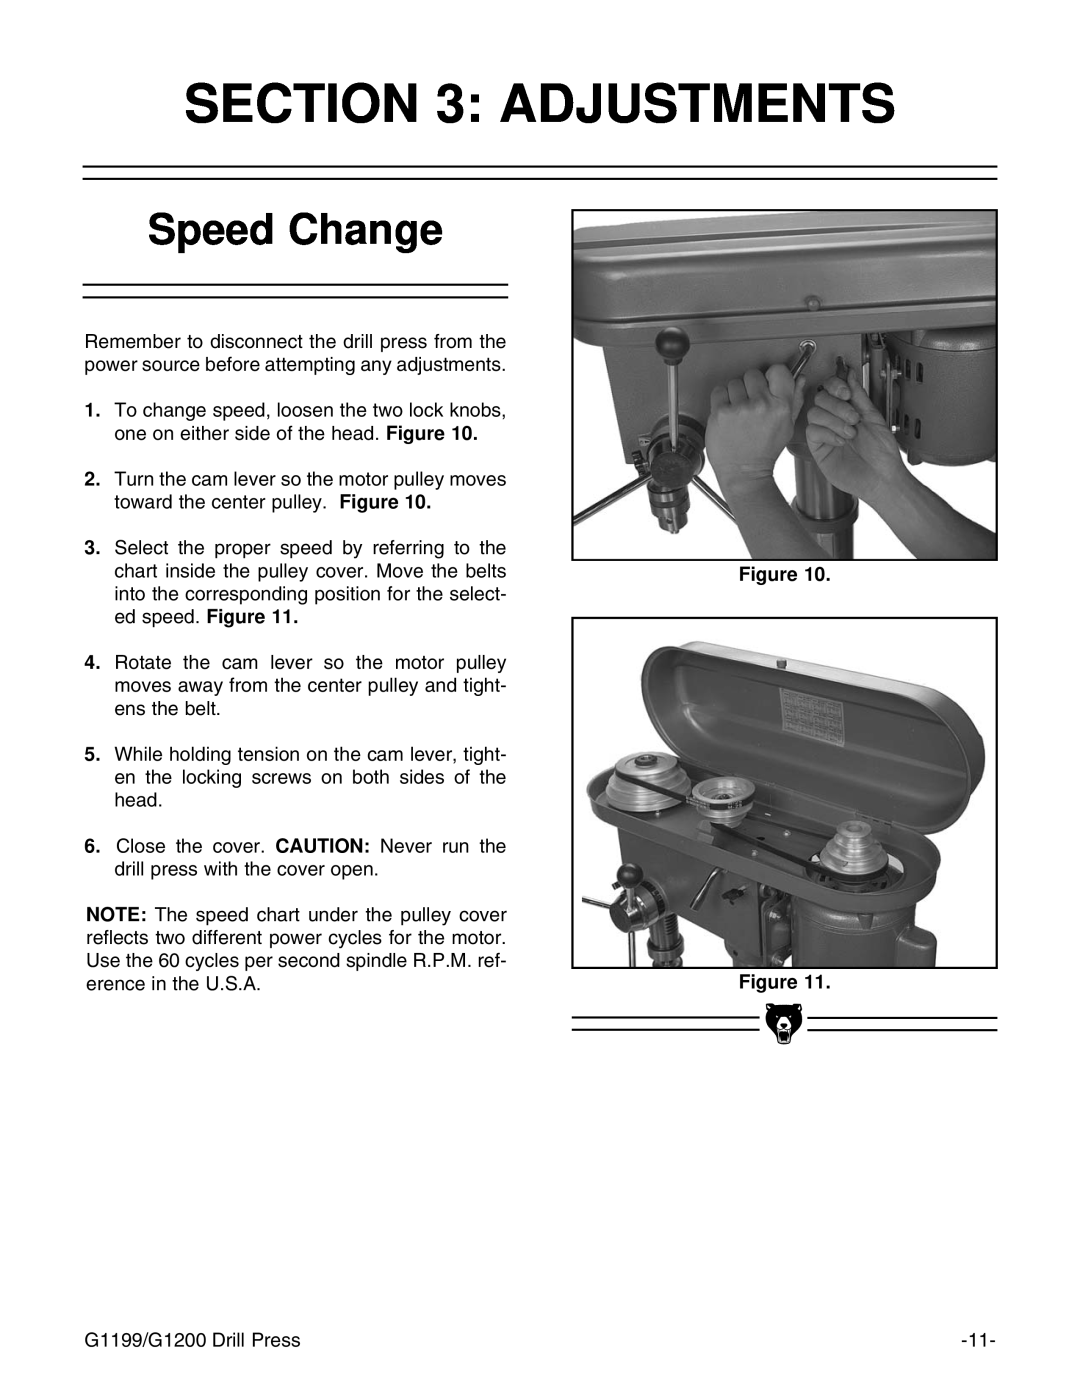 Grizzly G1200, G1199 instruction manual Adjustments, Speed Change 